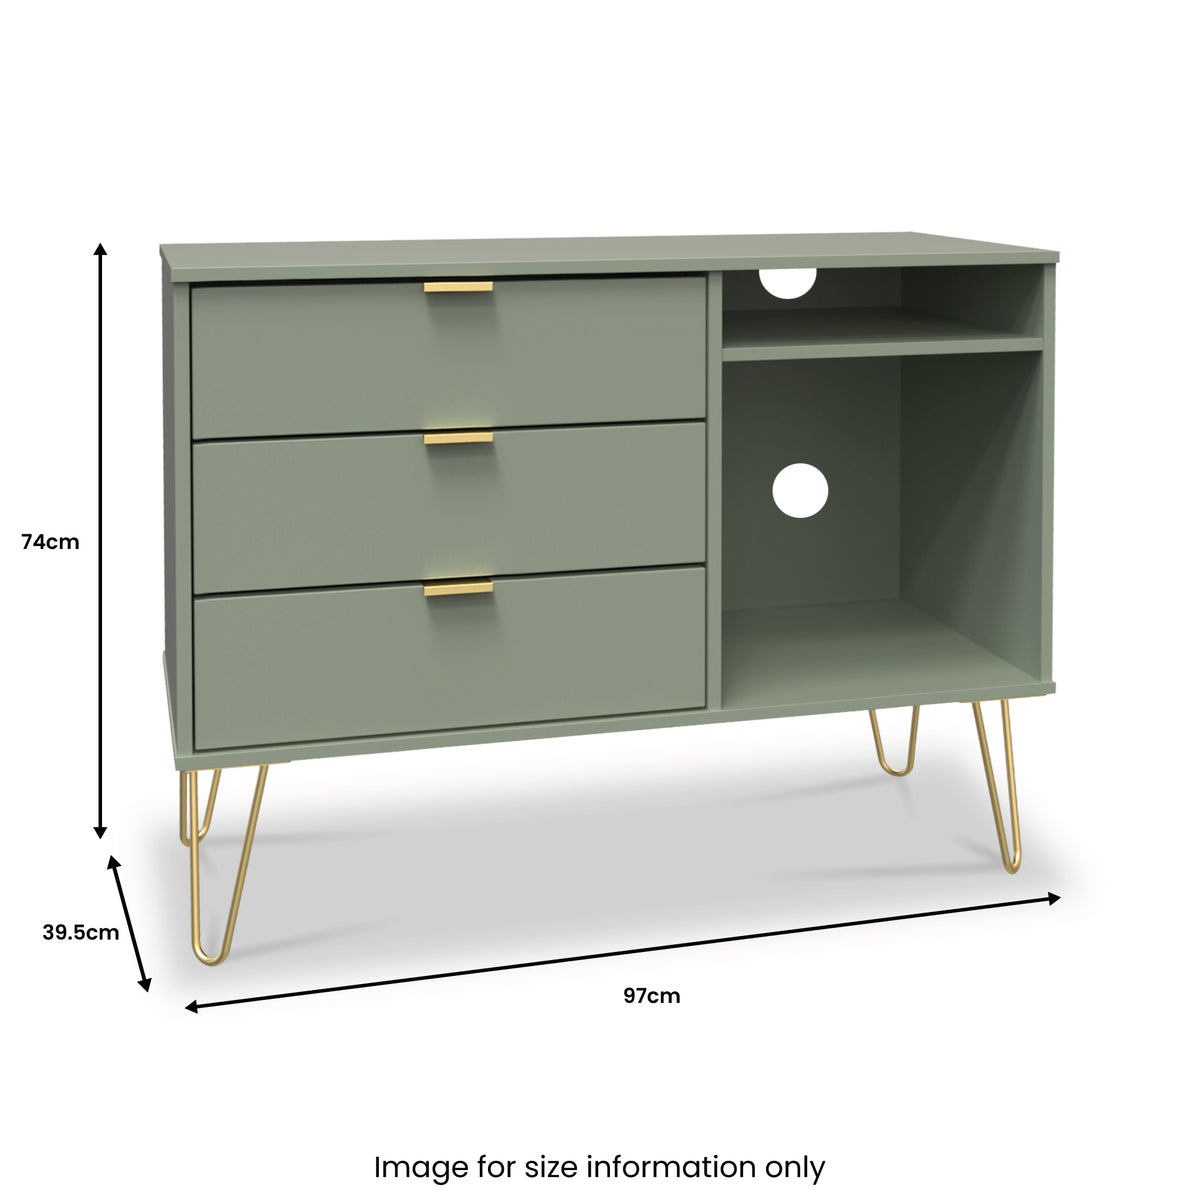 Moreno Olive 3 Drawer TV Unit with Gold Hairpin Legs from Roseland Furniture